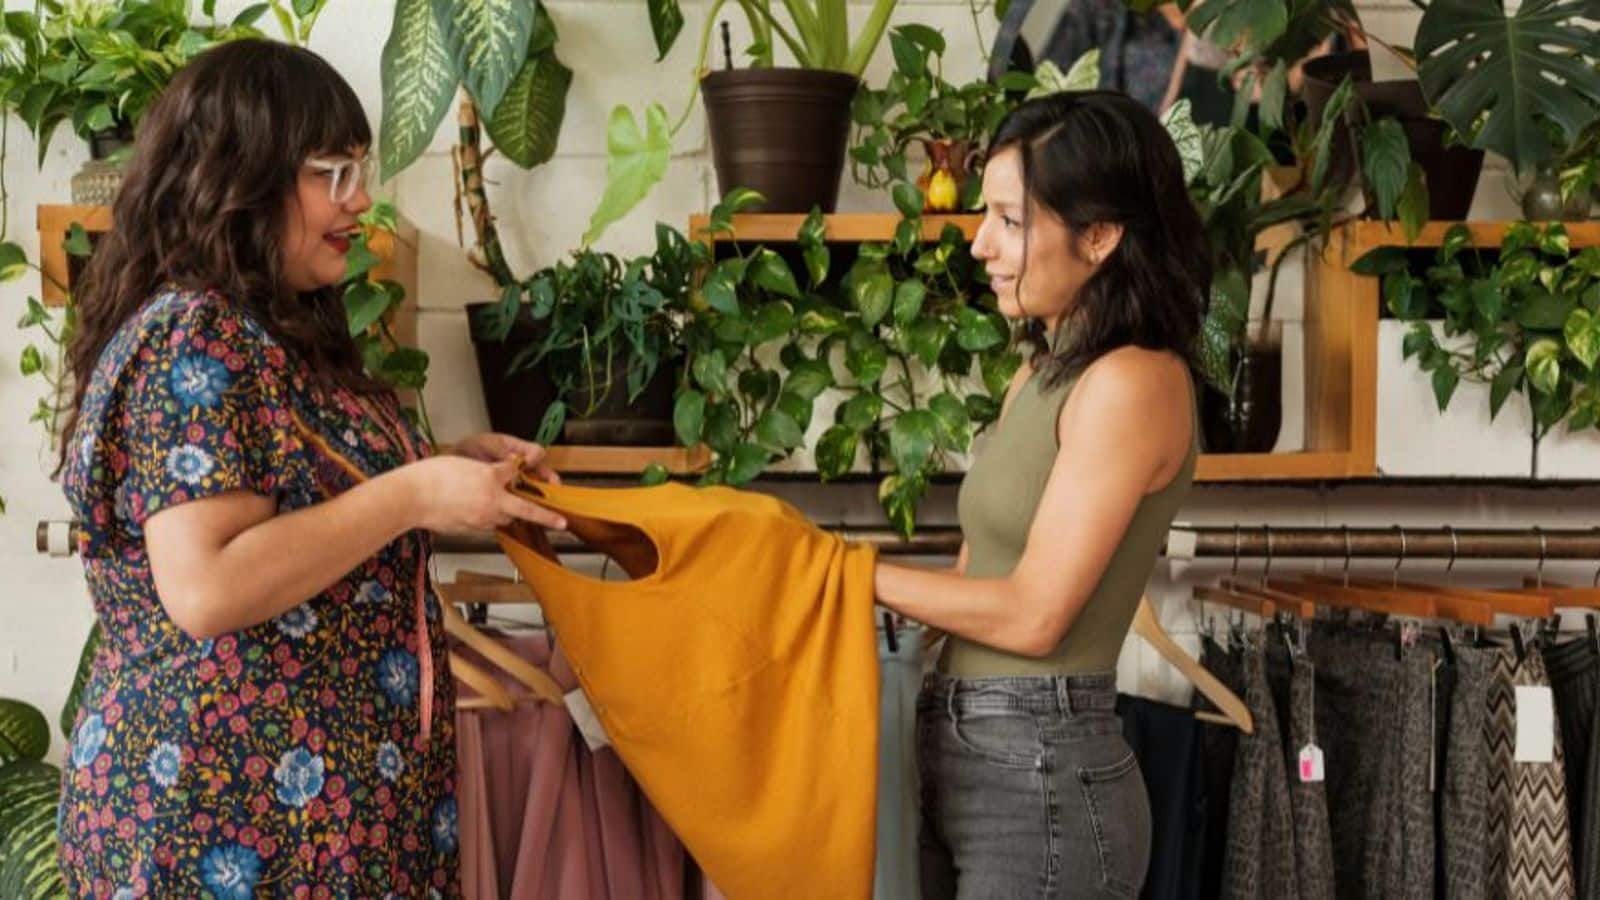 Here's how you can embrace upcycled fashion